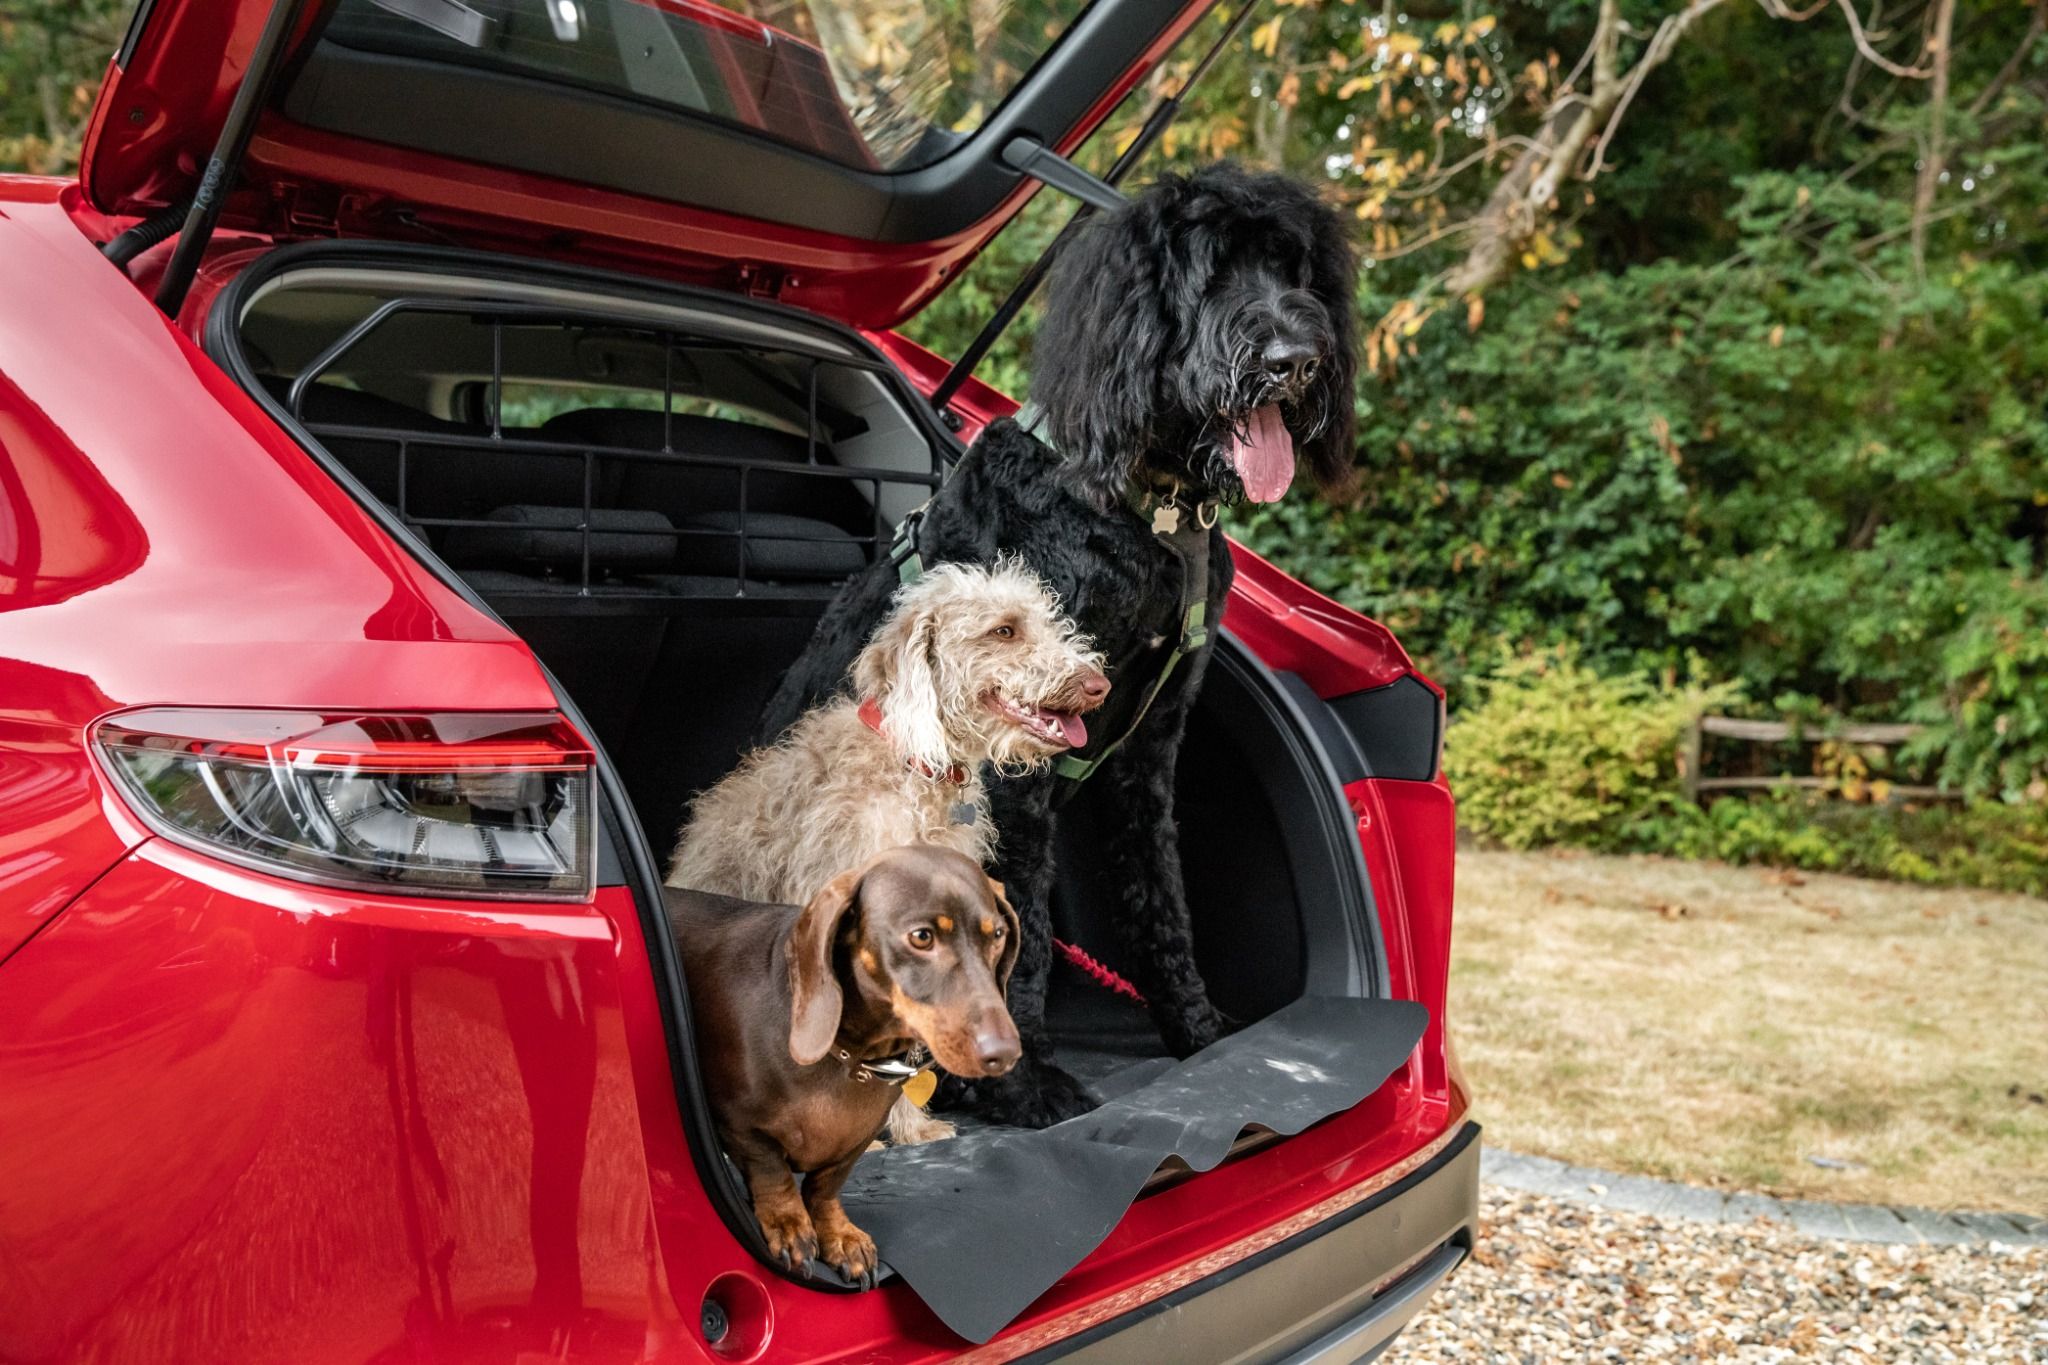 How to travel safely with pets in the vehicle